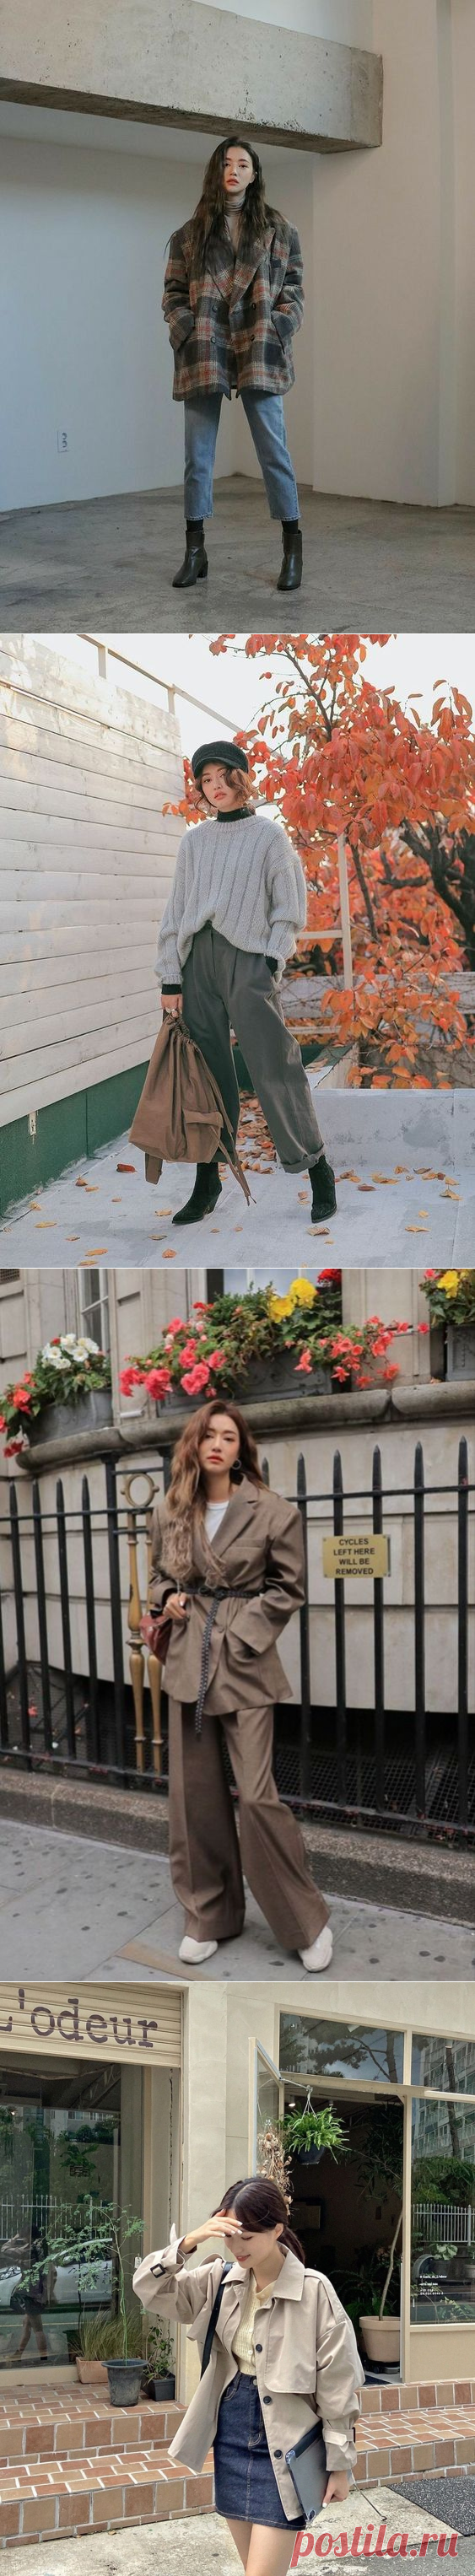 Chic Fall Outfit Trends Inspired By Korean Fashion Girls | Fashion Blog & Magazine